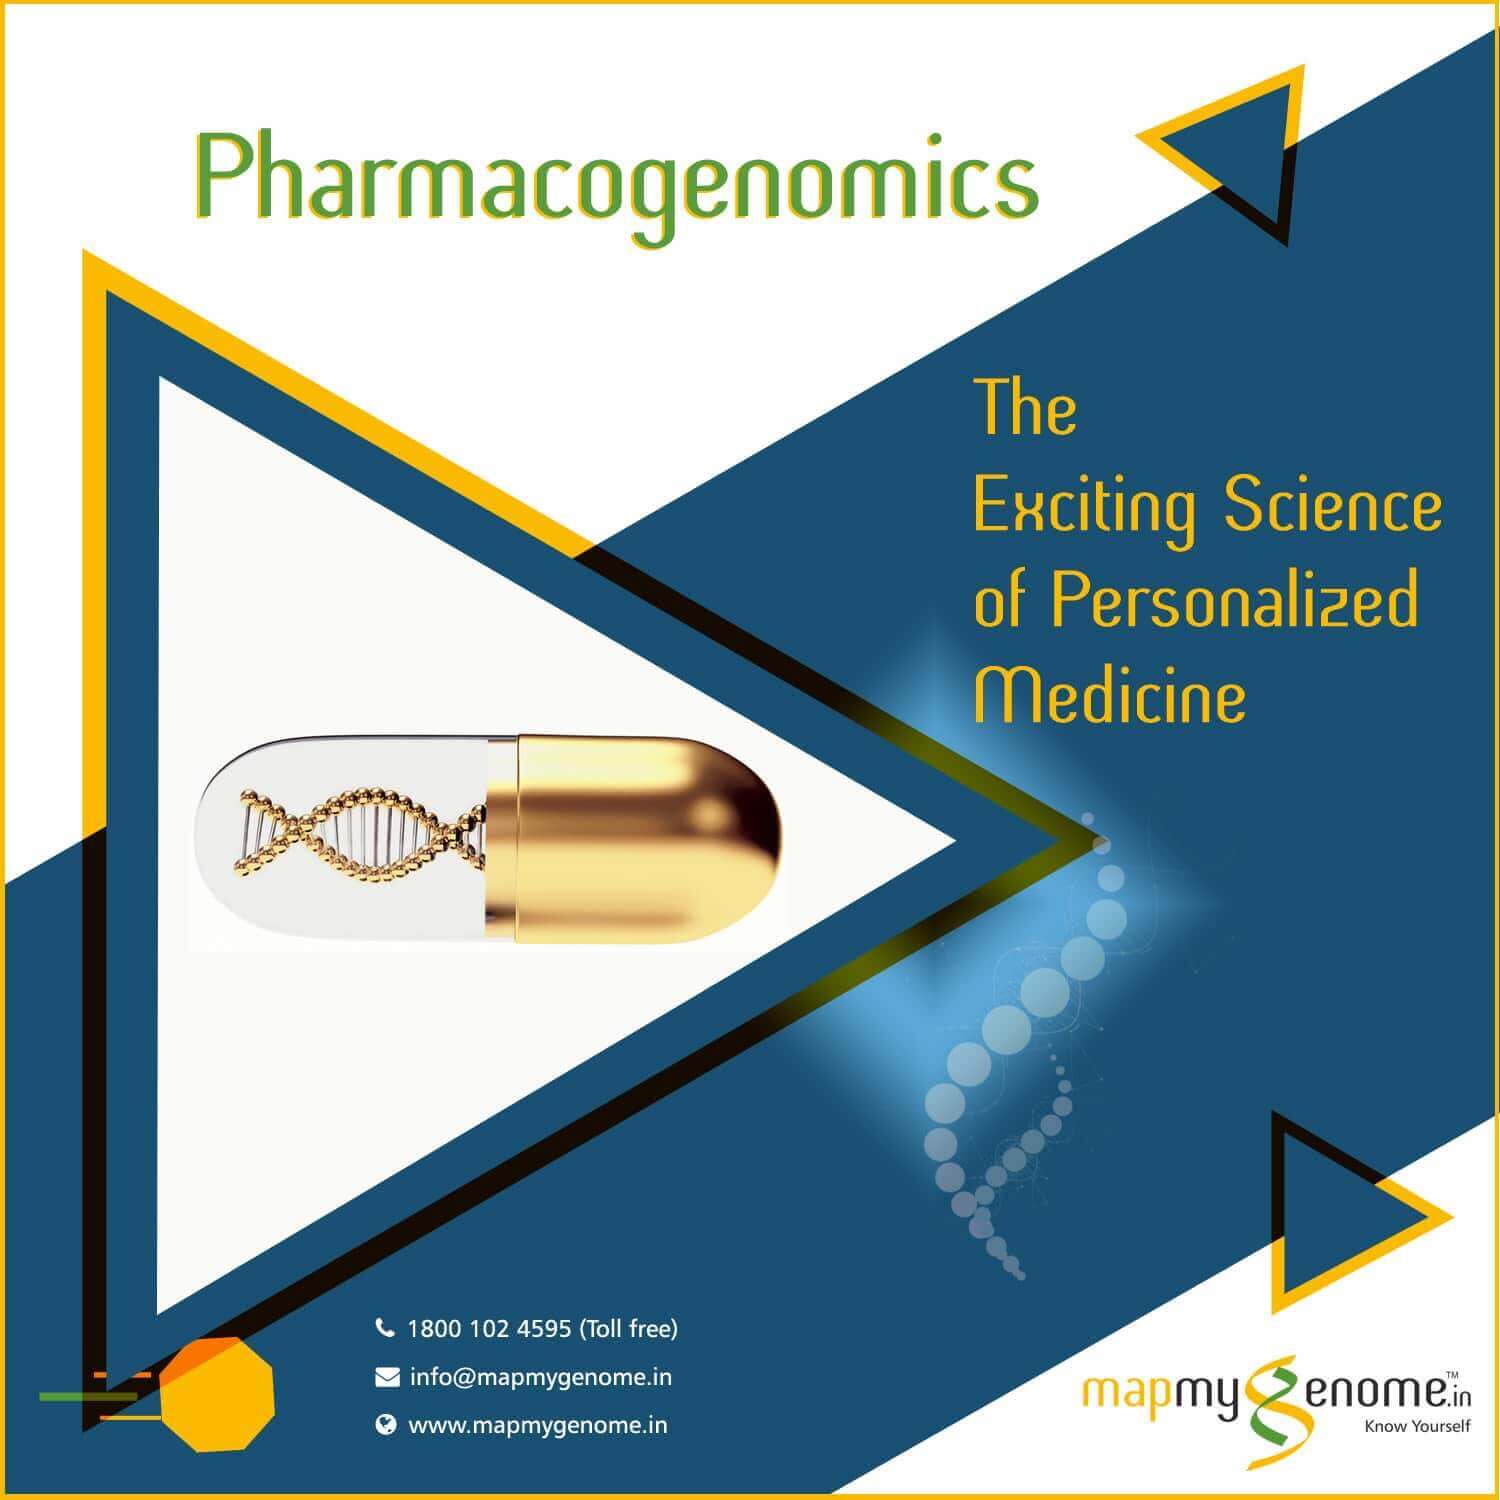 Pharmacogenomics: The Exciting Science of Personalized Medicine